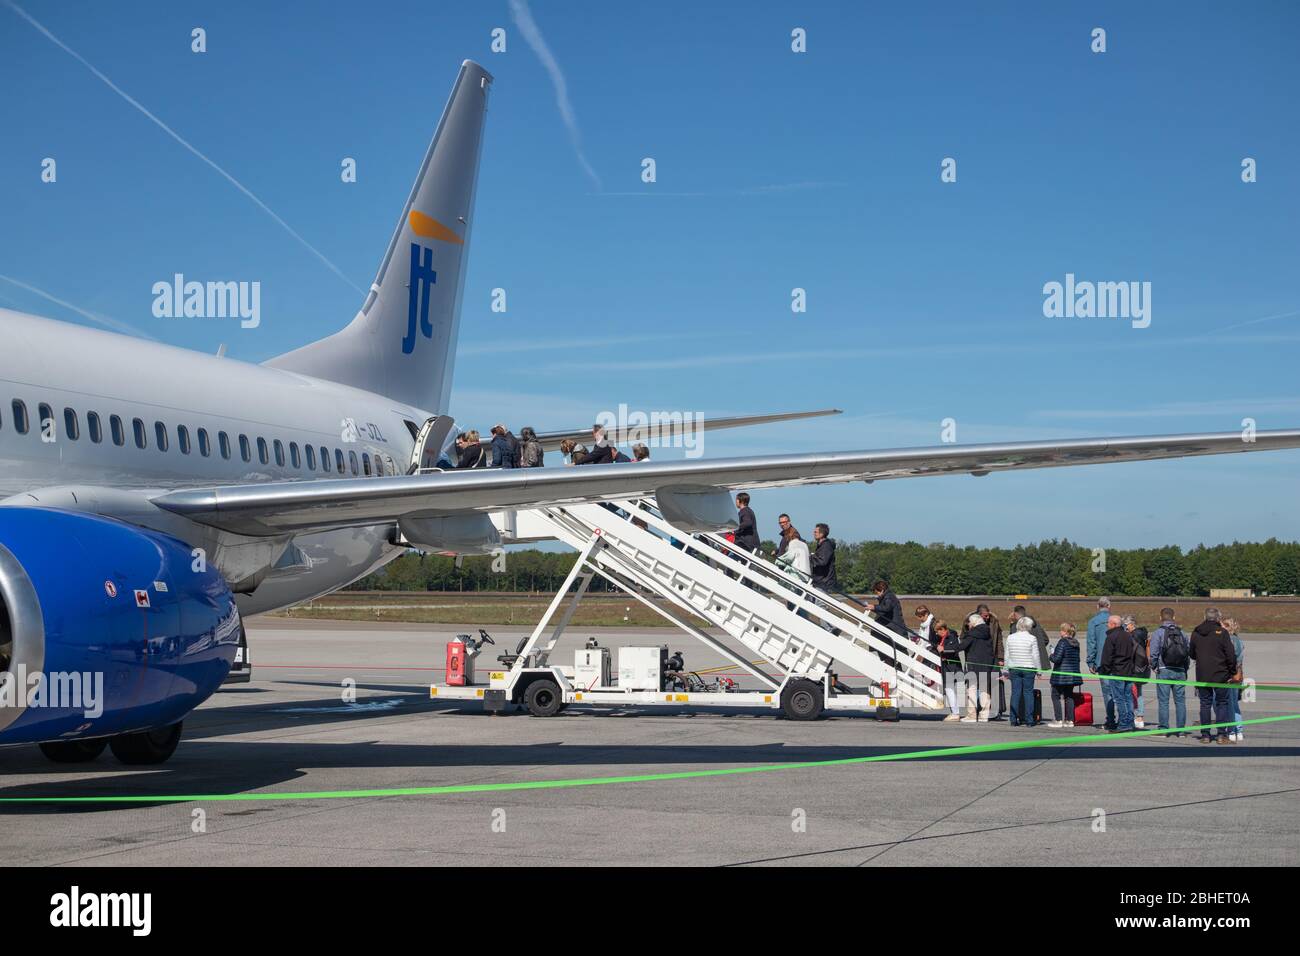 Travelers entering an airplane ready for departure at Eindhoven airport Stock Photo